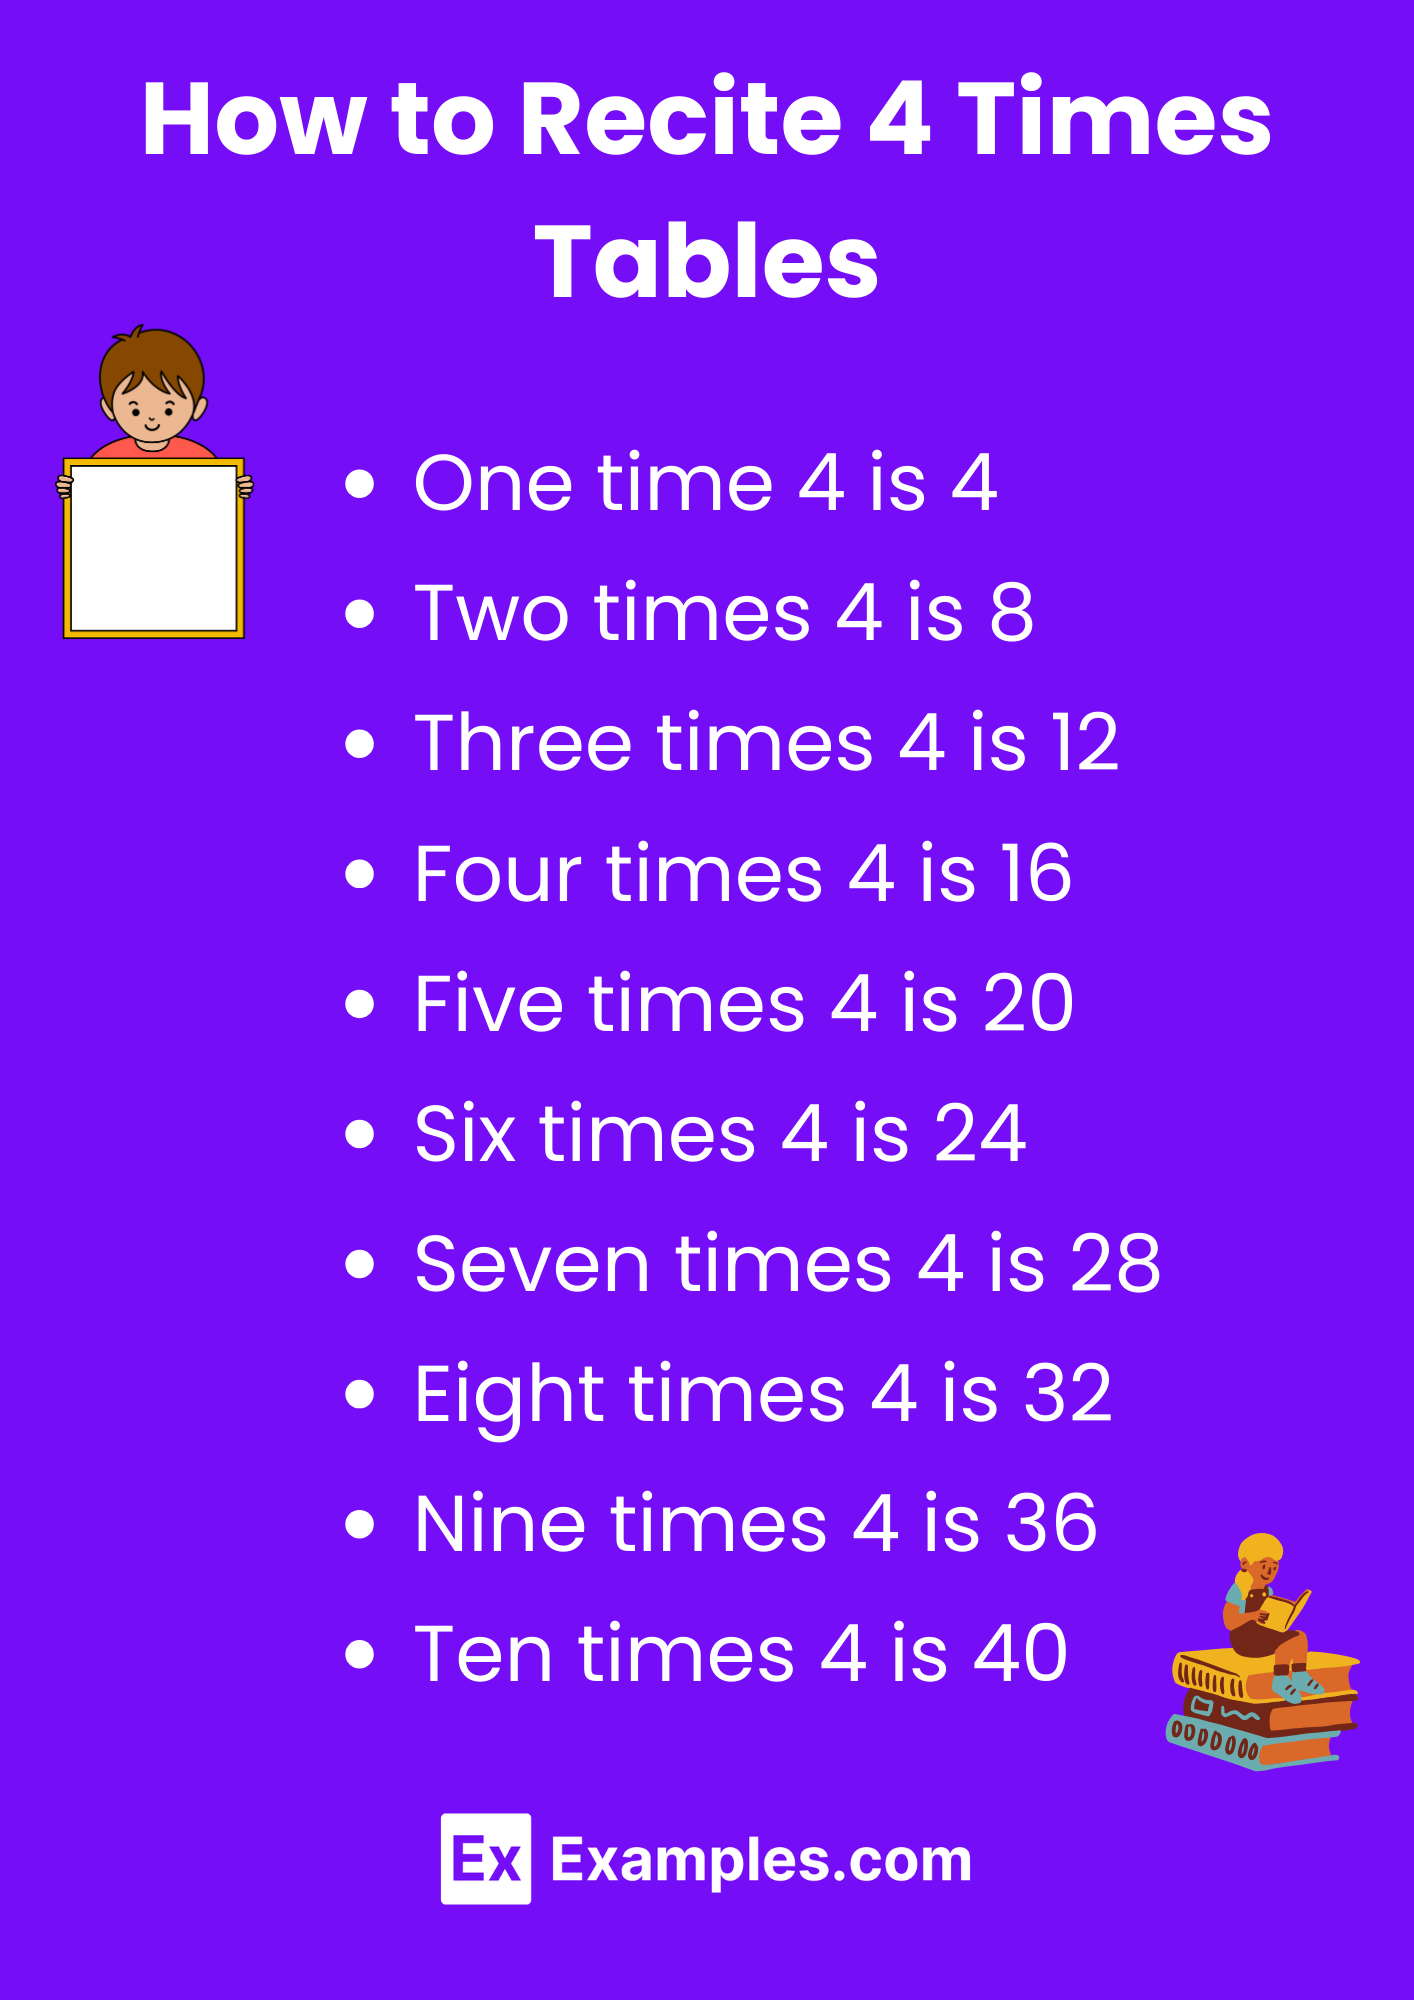 how to recite 4 times tables